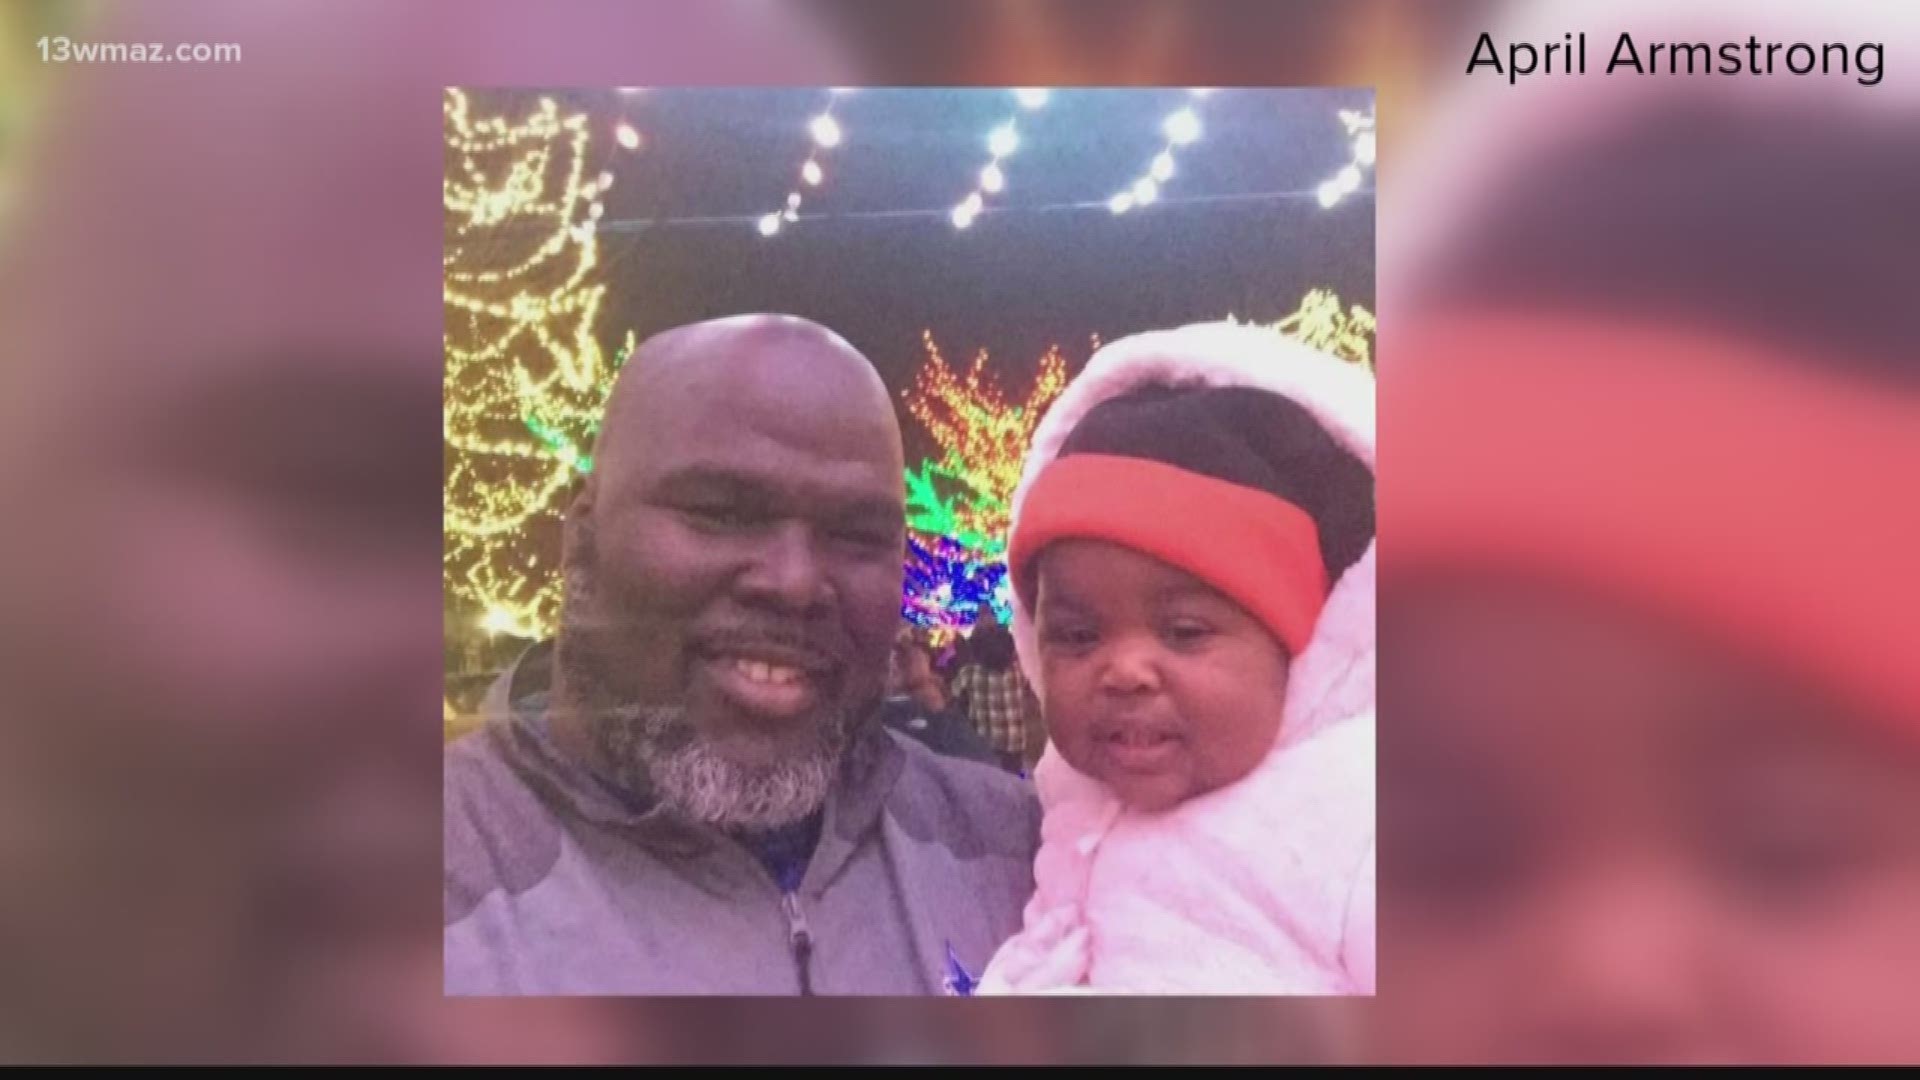 Coach Shawn Linder, 42, and Bella Ann Linder, 2, died Tuesday morning according to Georgia State Patrol.